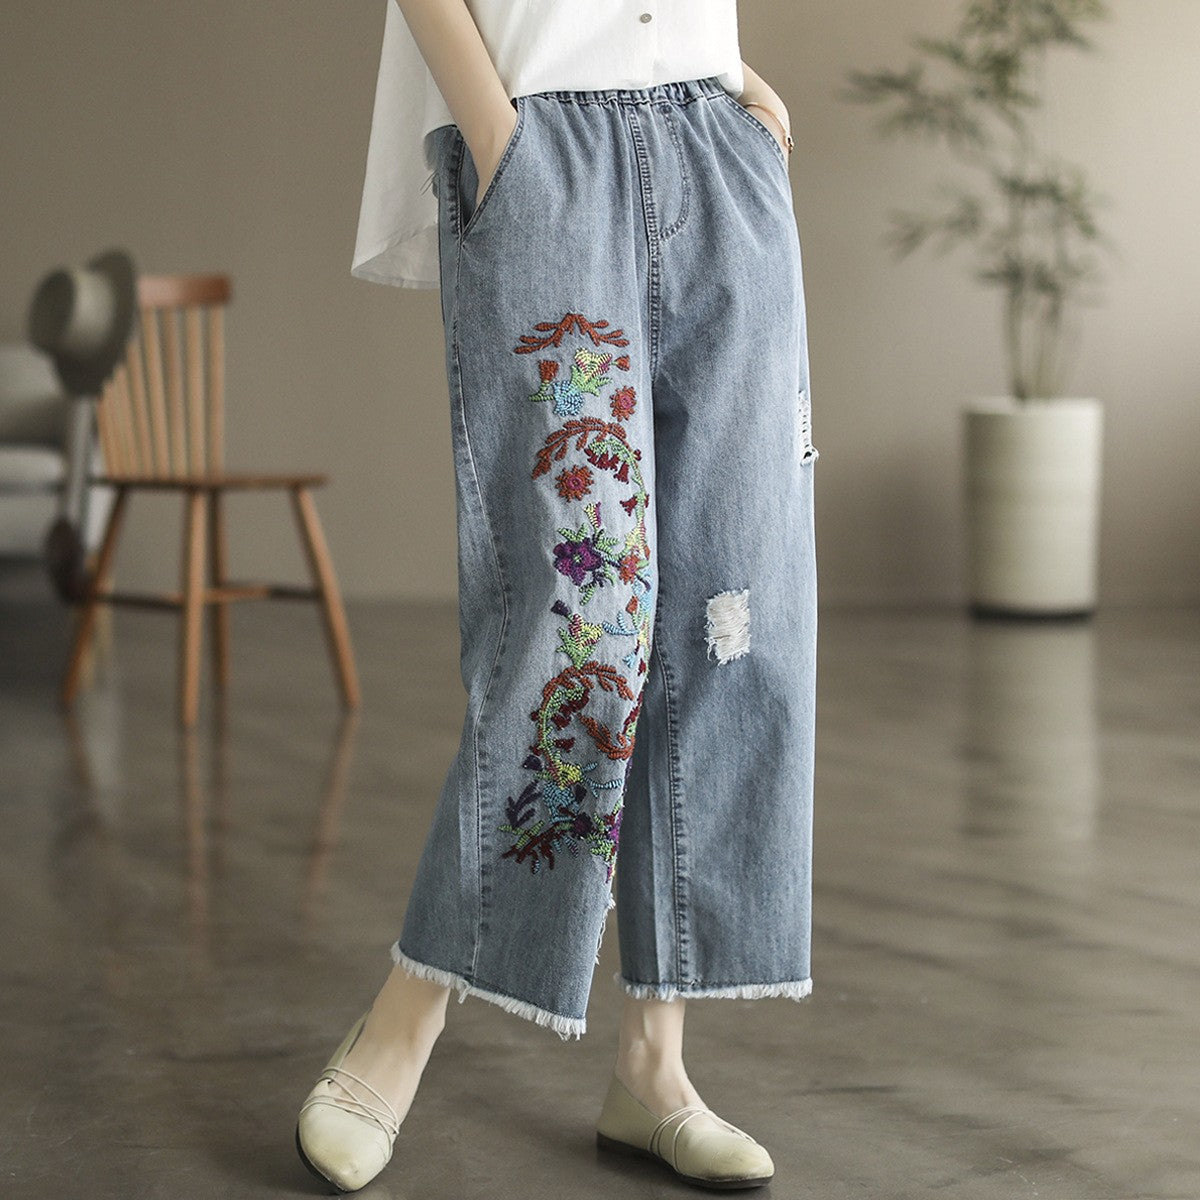 Casual embroidered fuzzy trim baggy jeans for women